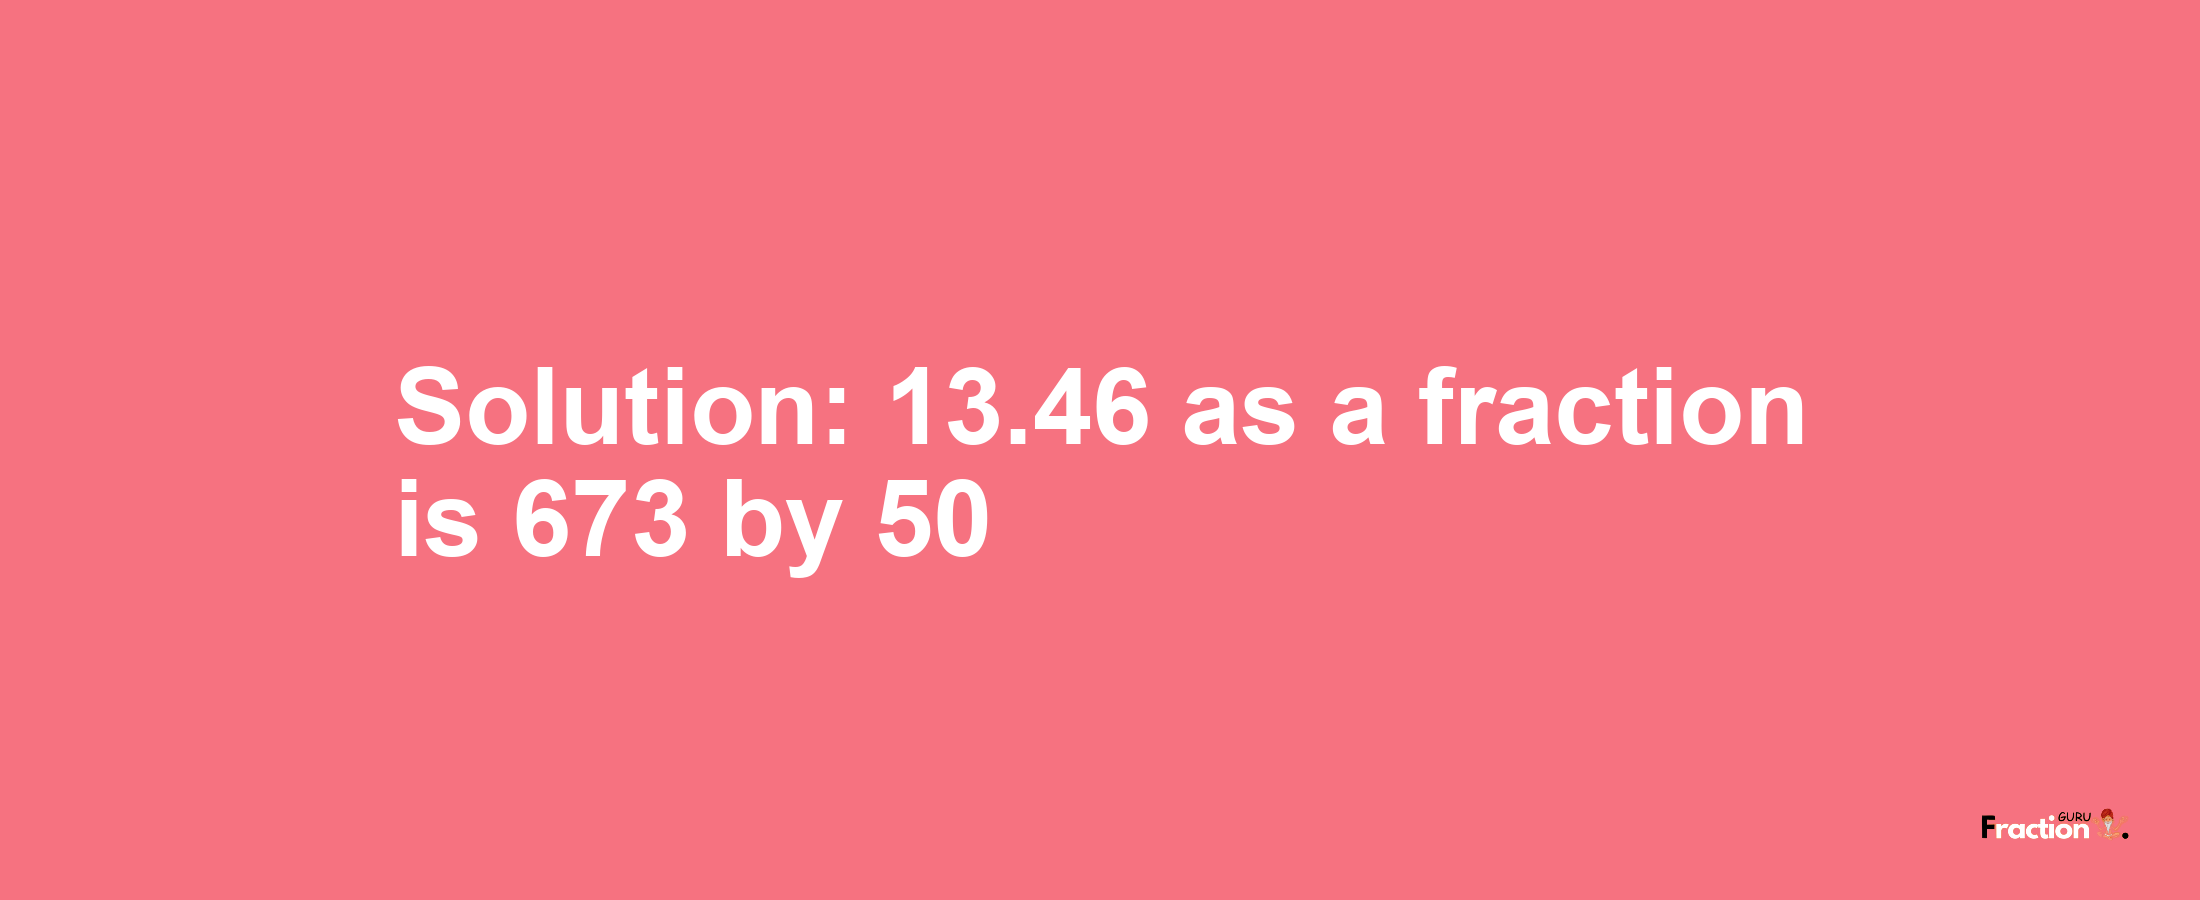 Solution:13.46 as a fraction is 673/50